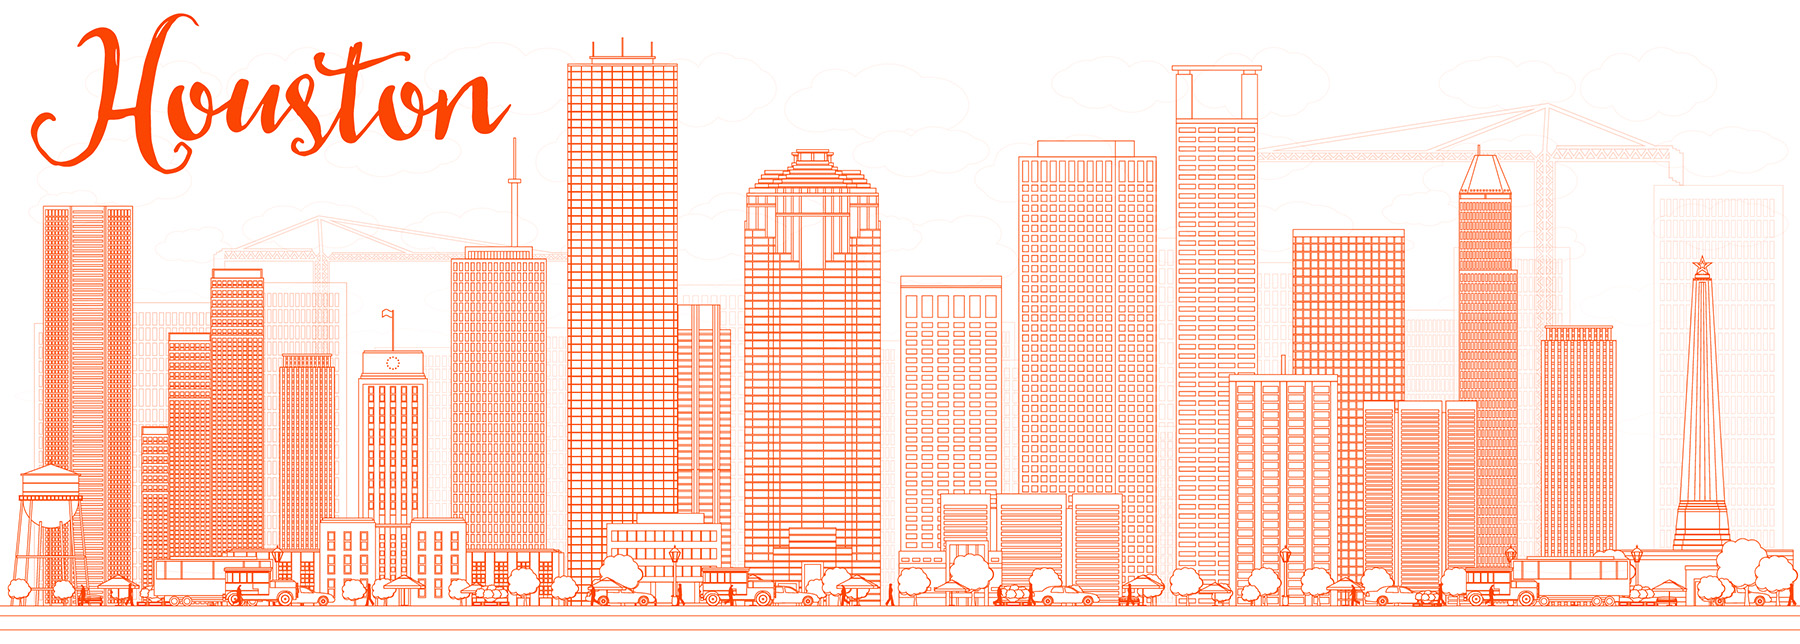 Image shows the Houston skyline as a drawing.